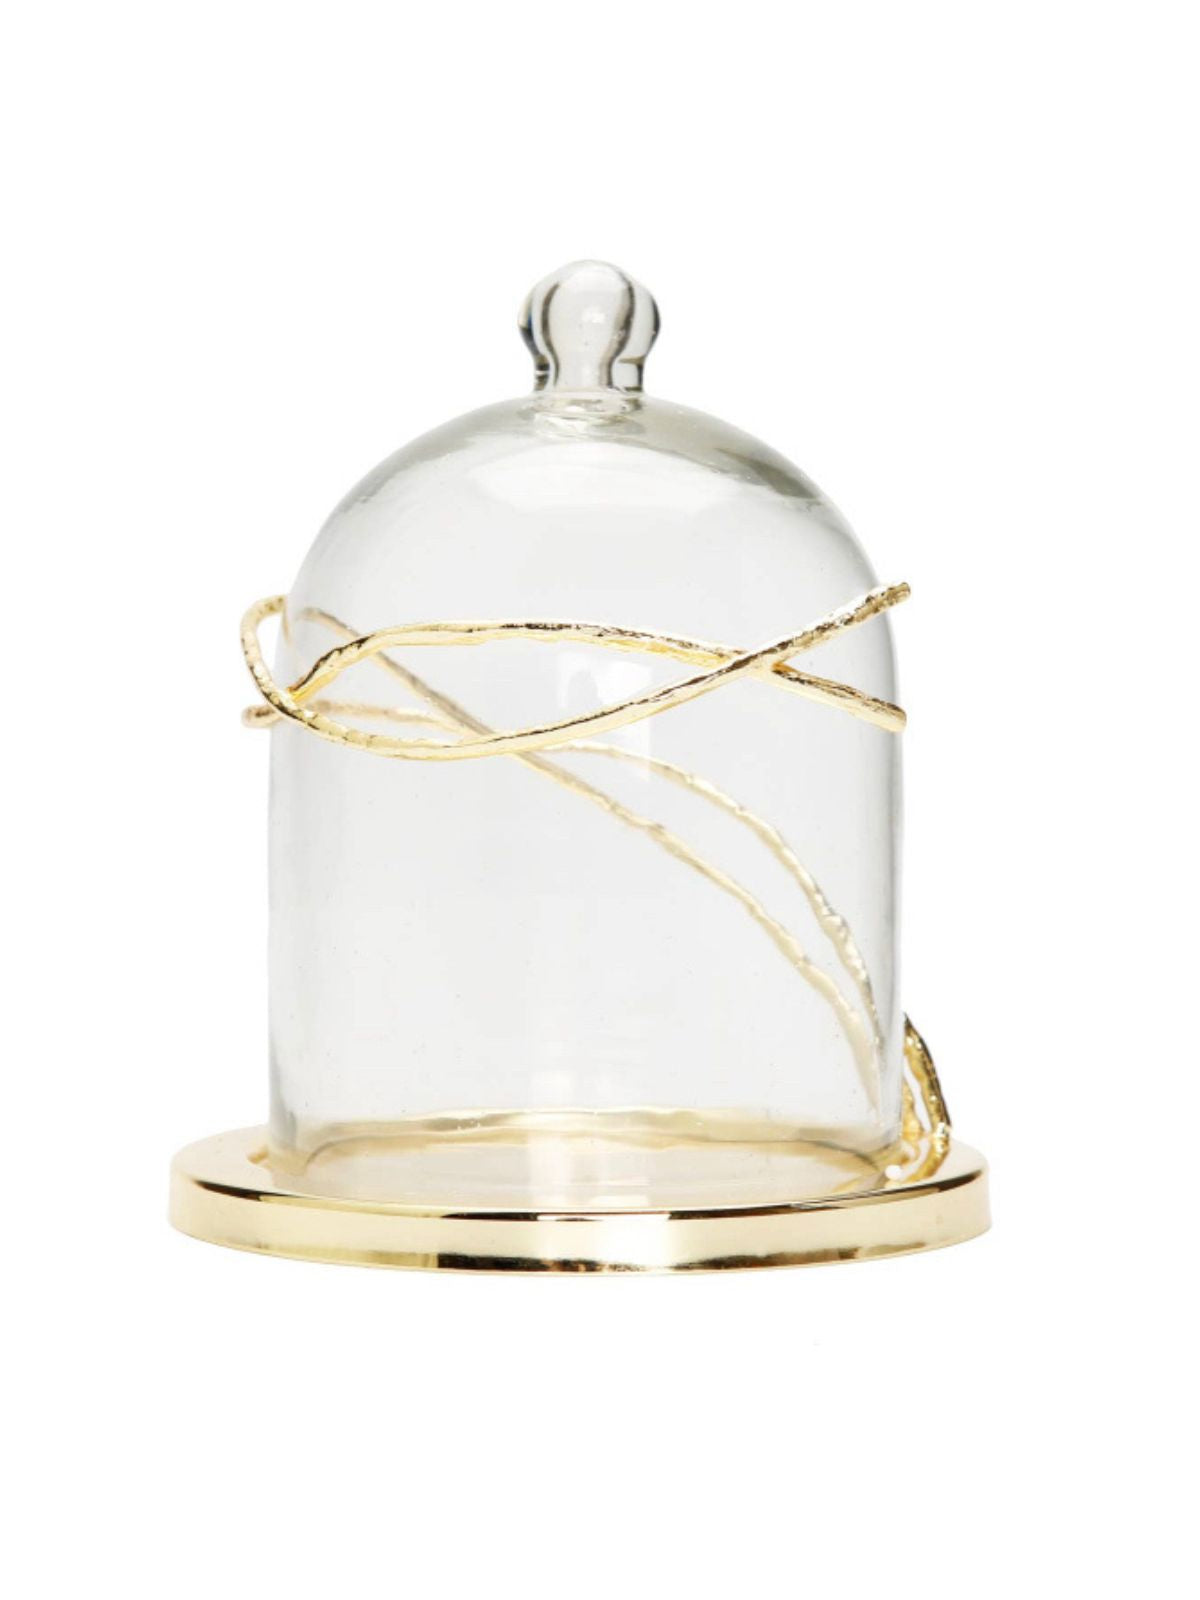 This stunning Glass Dome Candle Holder has an amazing Gold Twig Design.